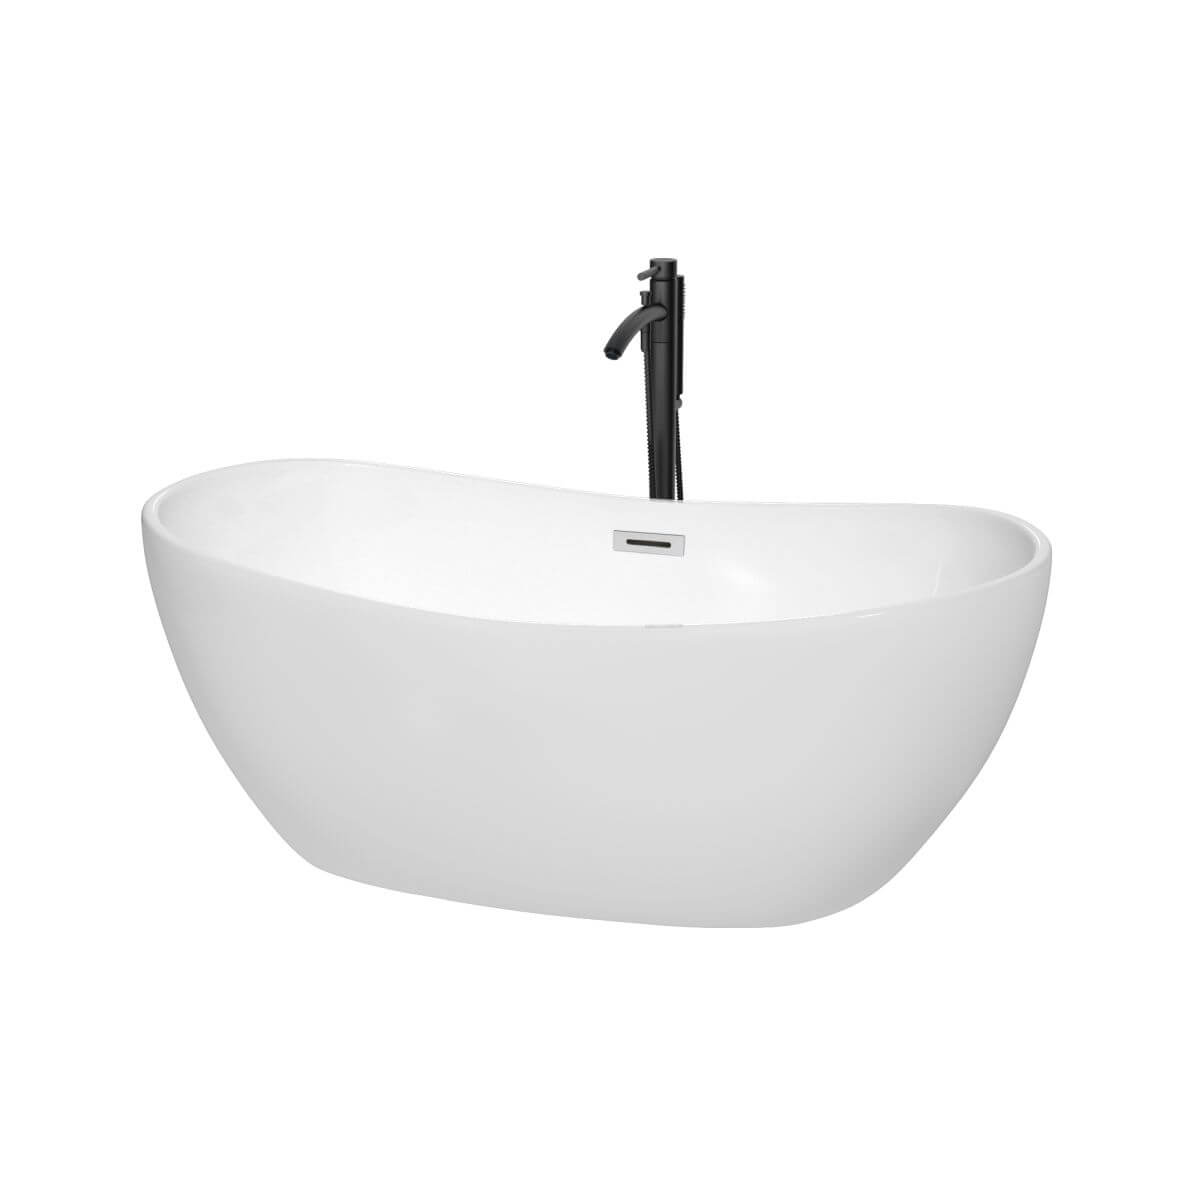 Wyndham Collection Rebecca 60 inch Freestanding Bathtub in White with Polished Chrome Trim and Floor Mounted Faucet in Matte Black - WCOBT101460PCATPBK